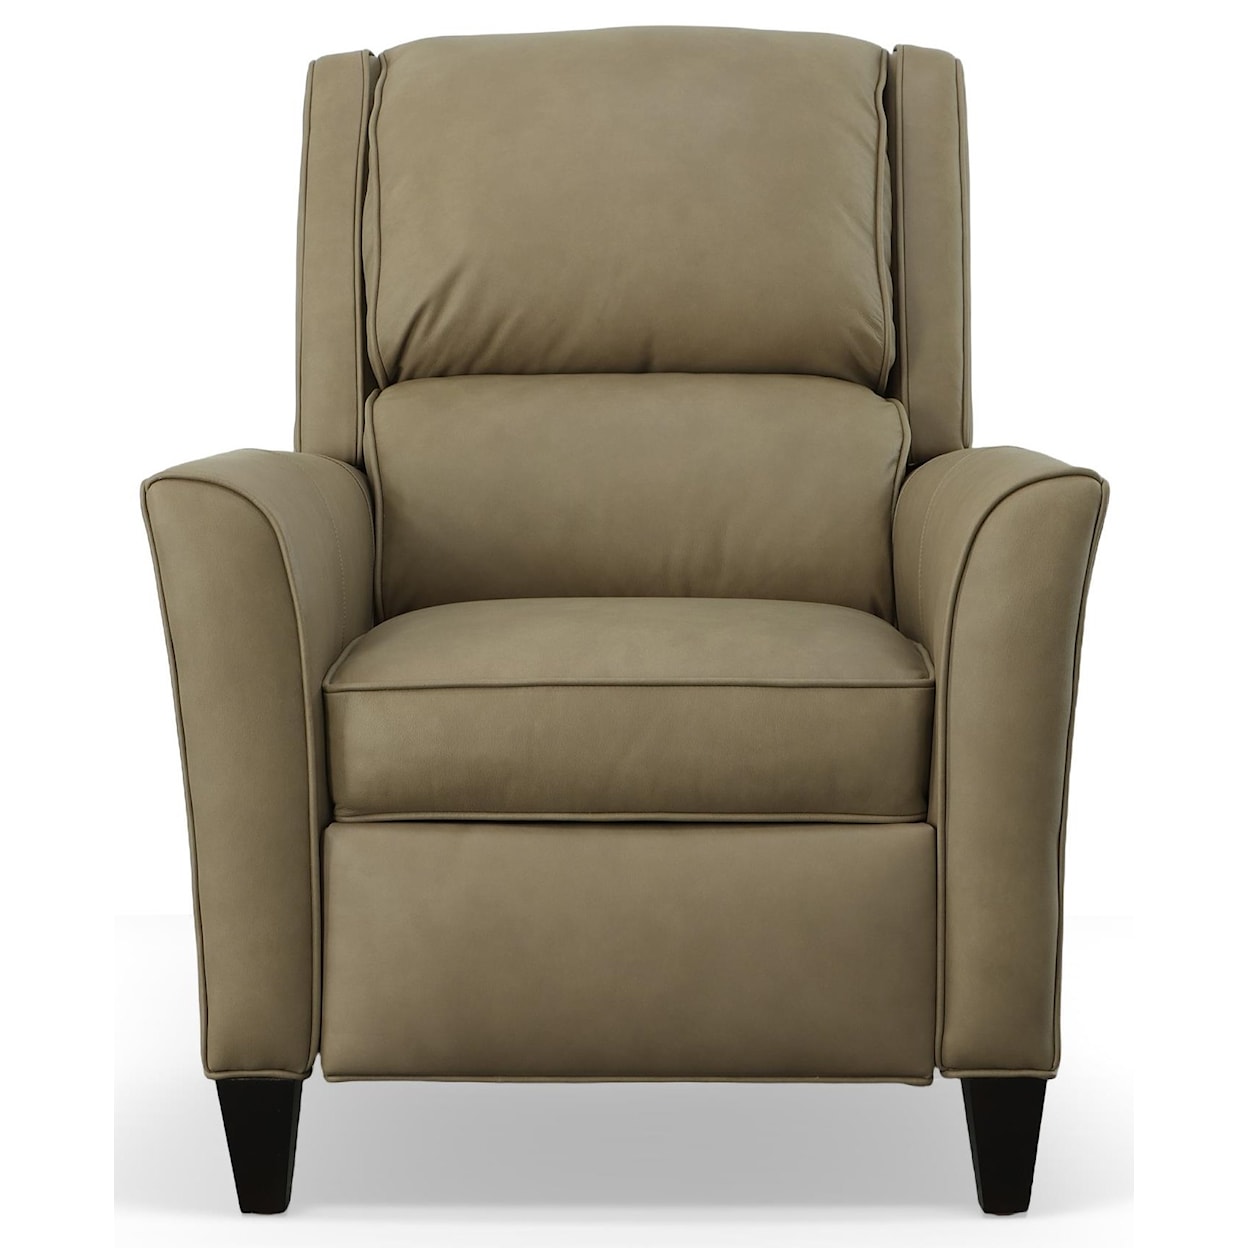 Bradington Young Chairs That Recline Roswell Lounger